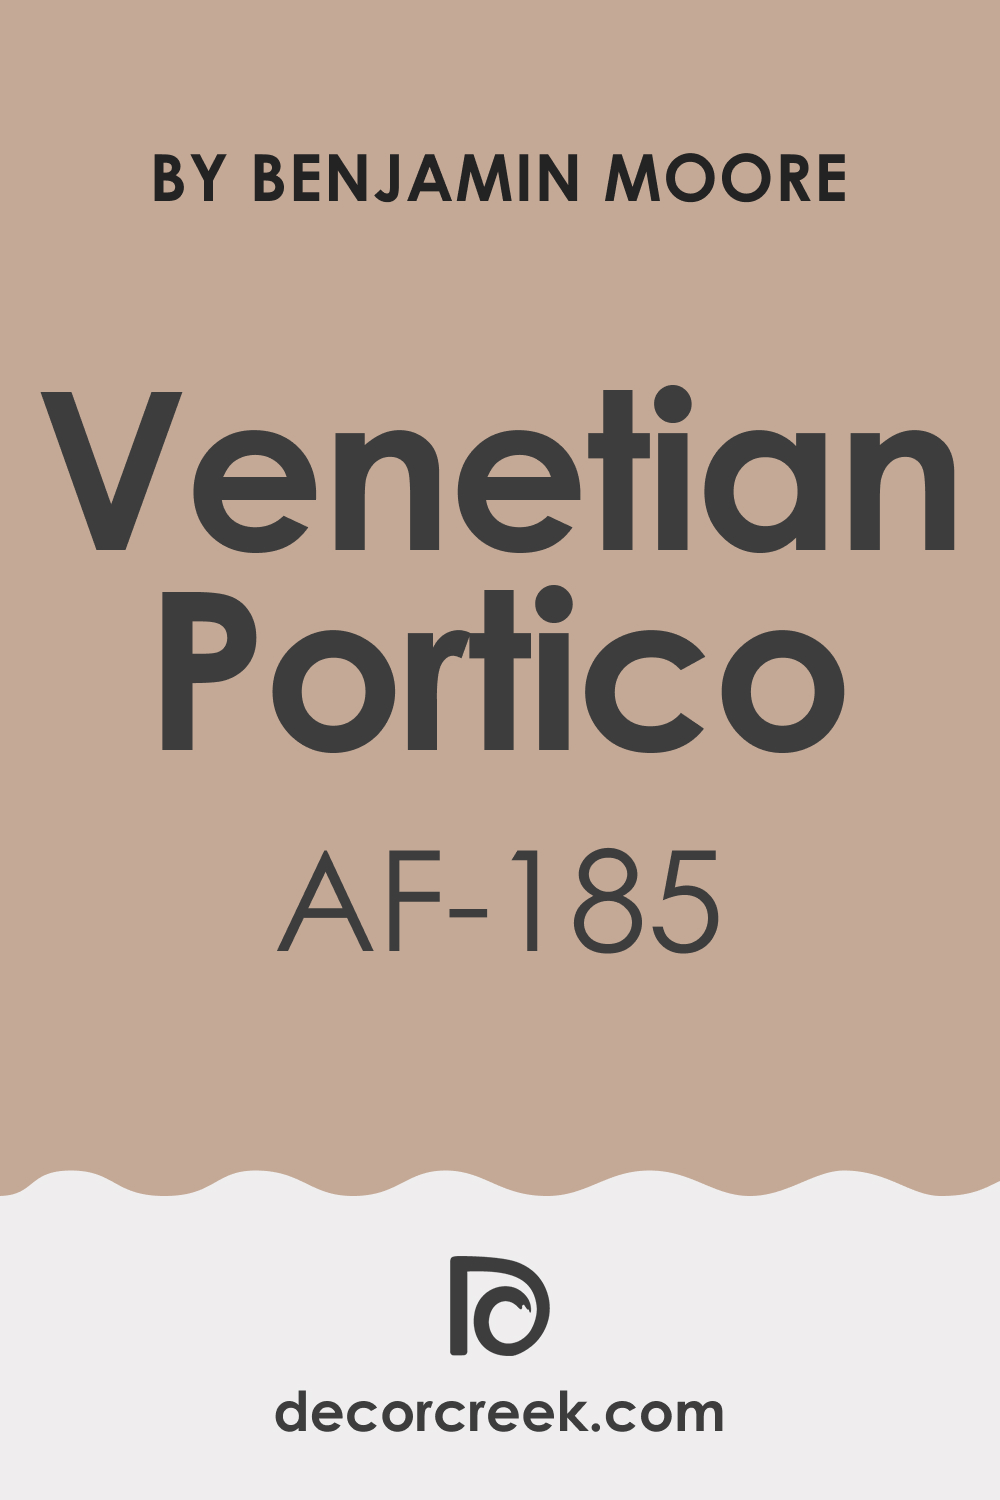 What Color Is Venetian Portico AF-185?